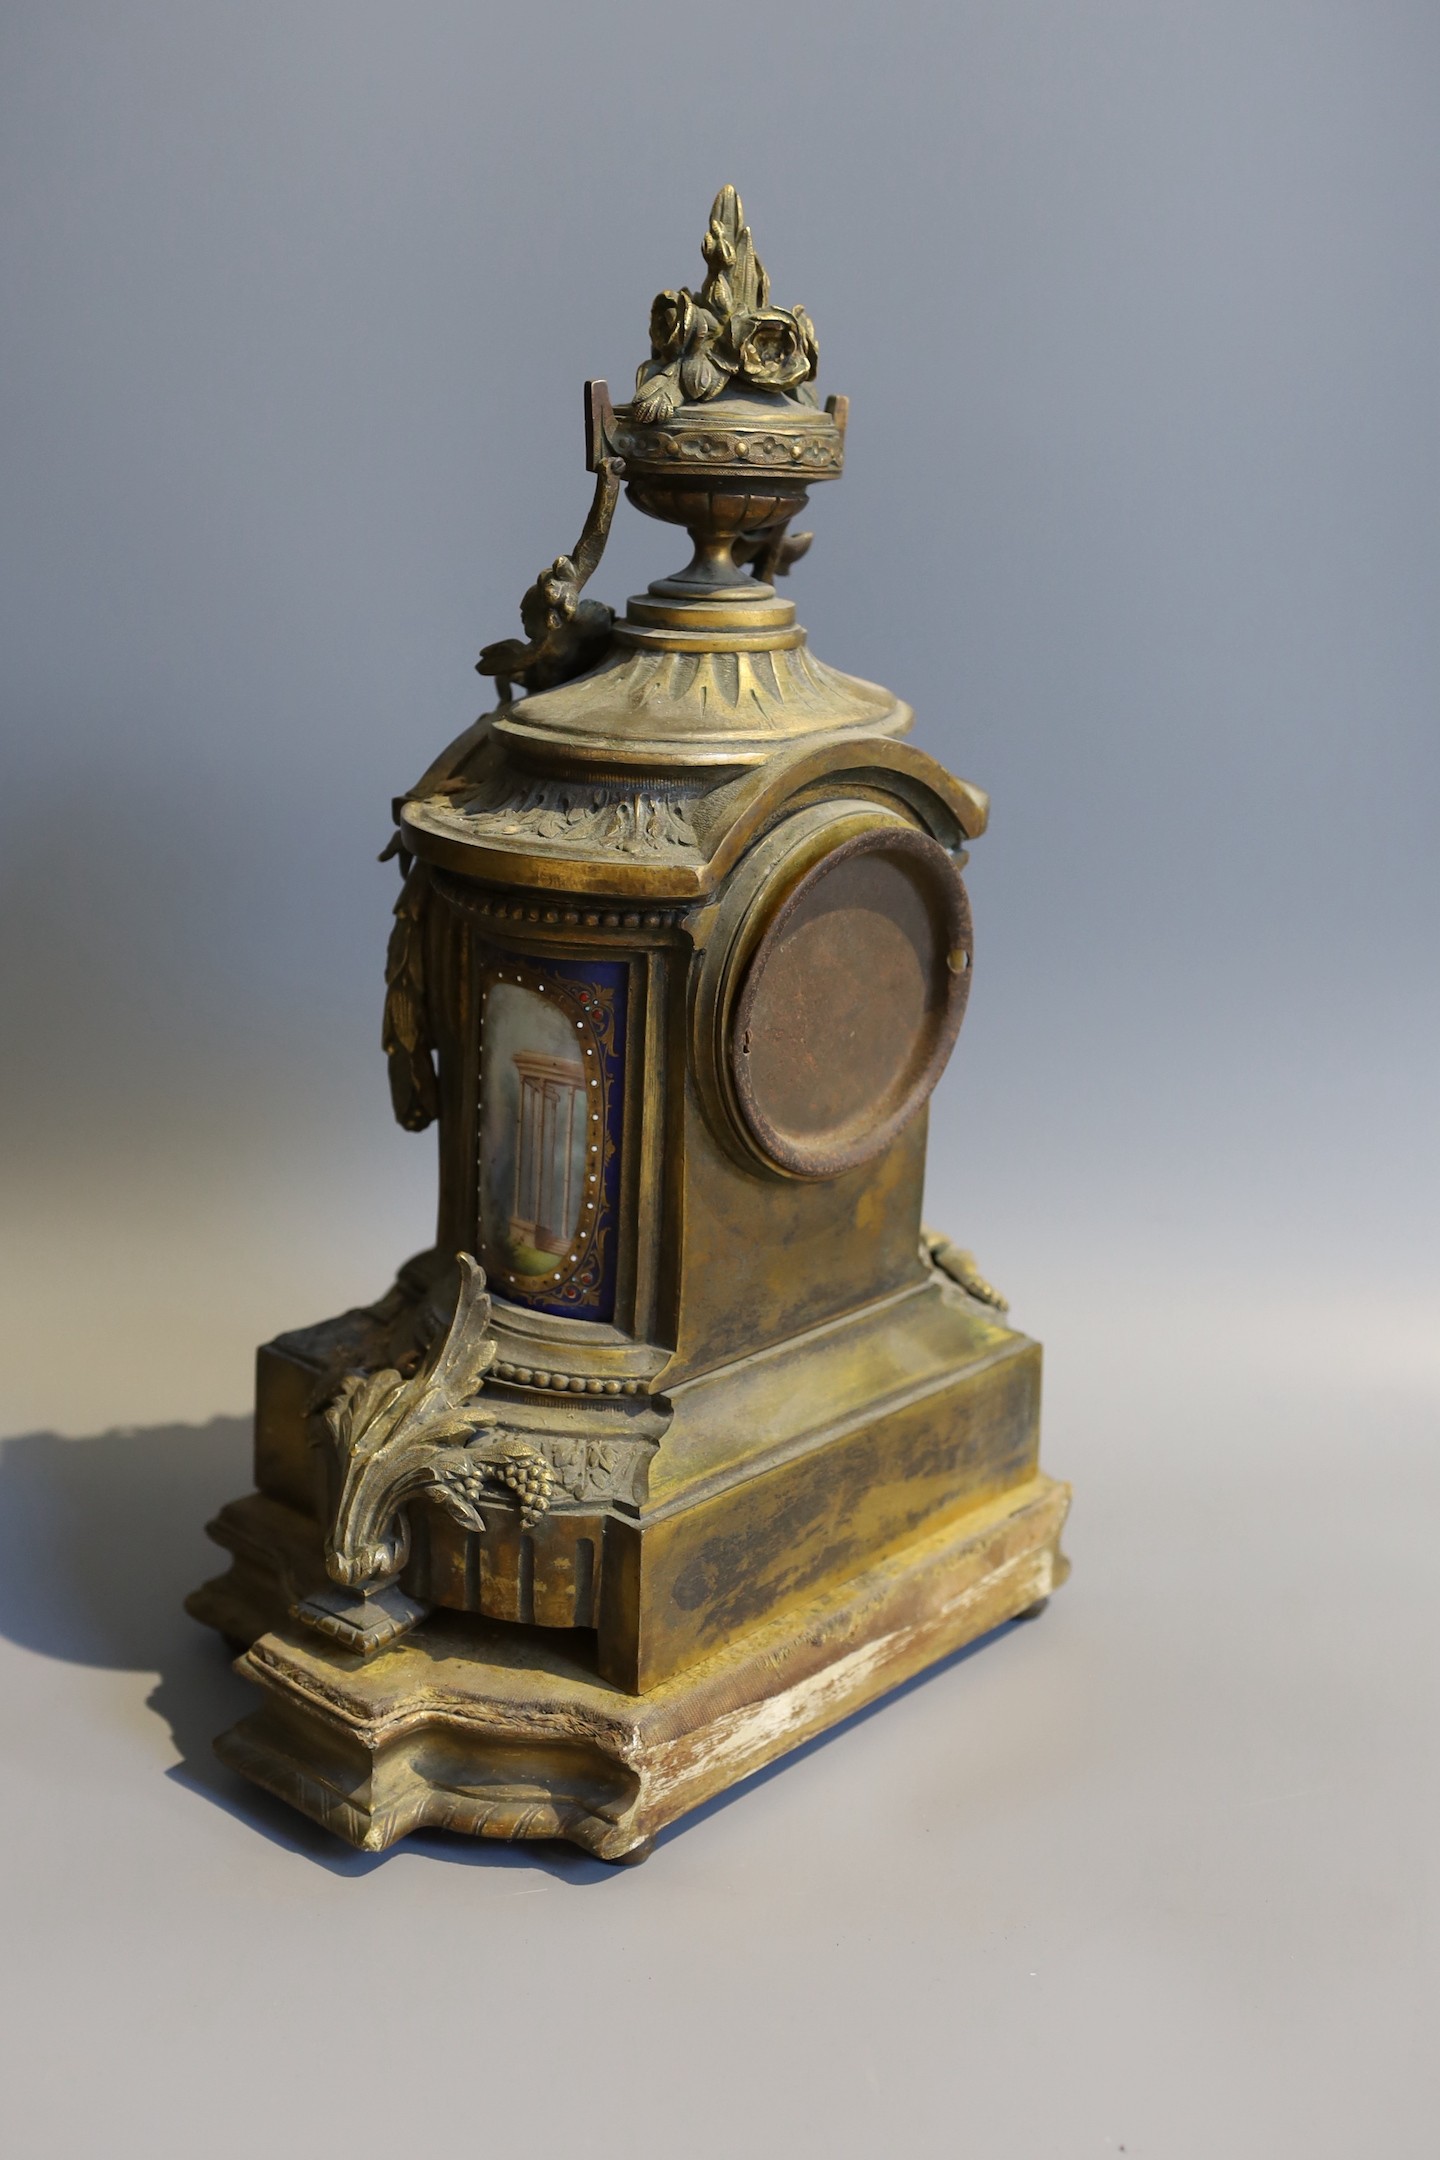 A 19th century French gilt metal and porcelain eight day mantel clock, with floral urn pediment, height 42cm